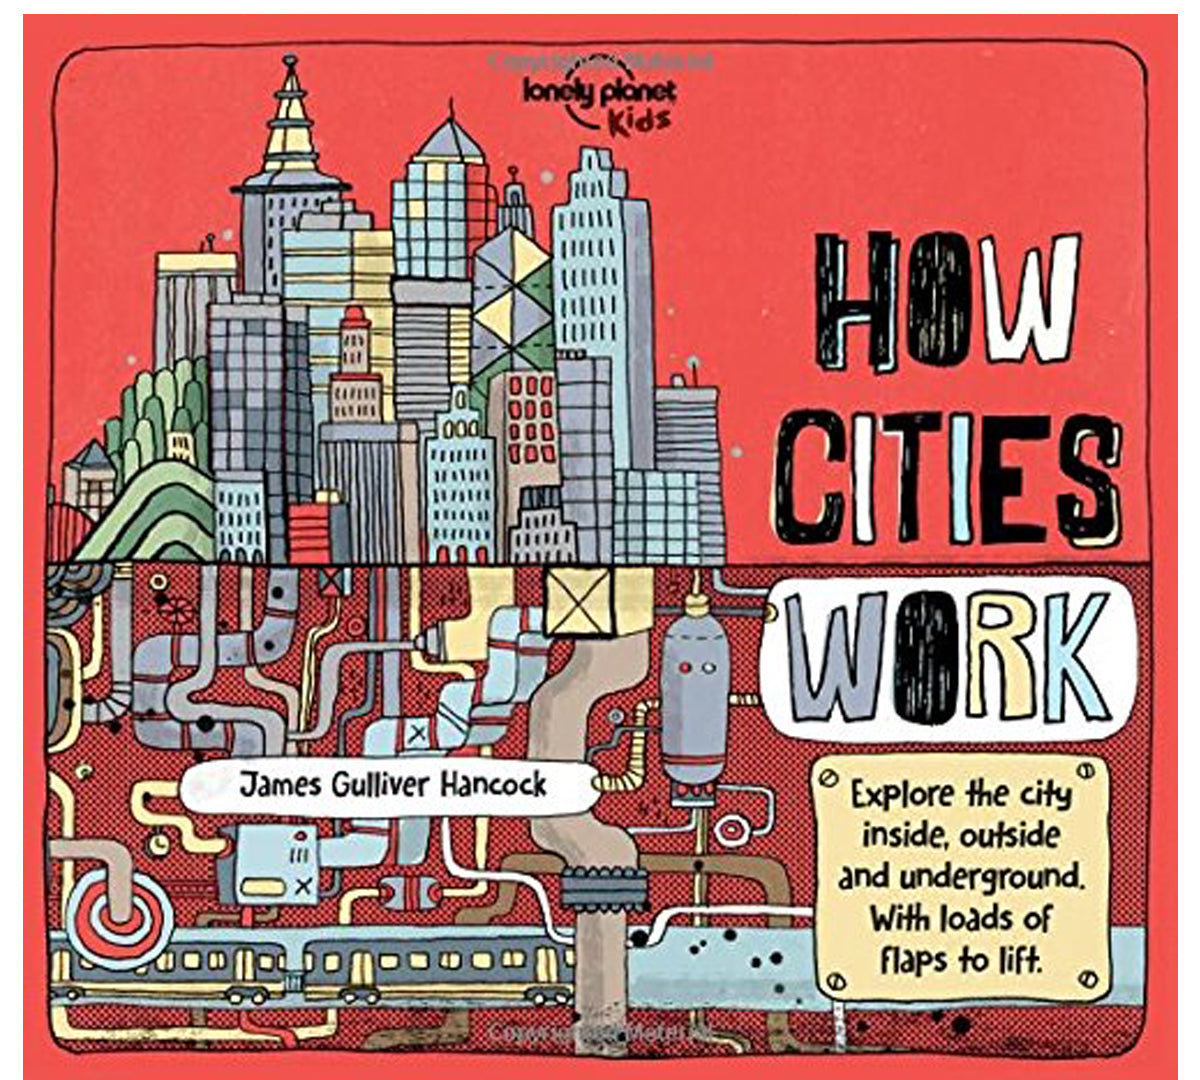 Deer Industries Lonely planet kids How Cities Work. Educational book for kids aged 7-12, great gift. 